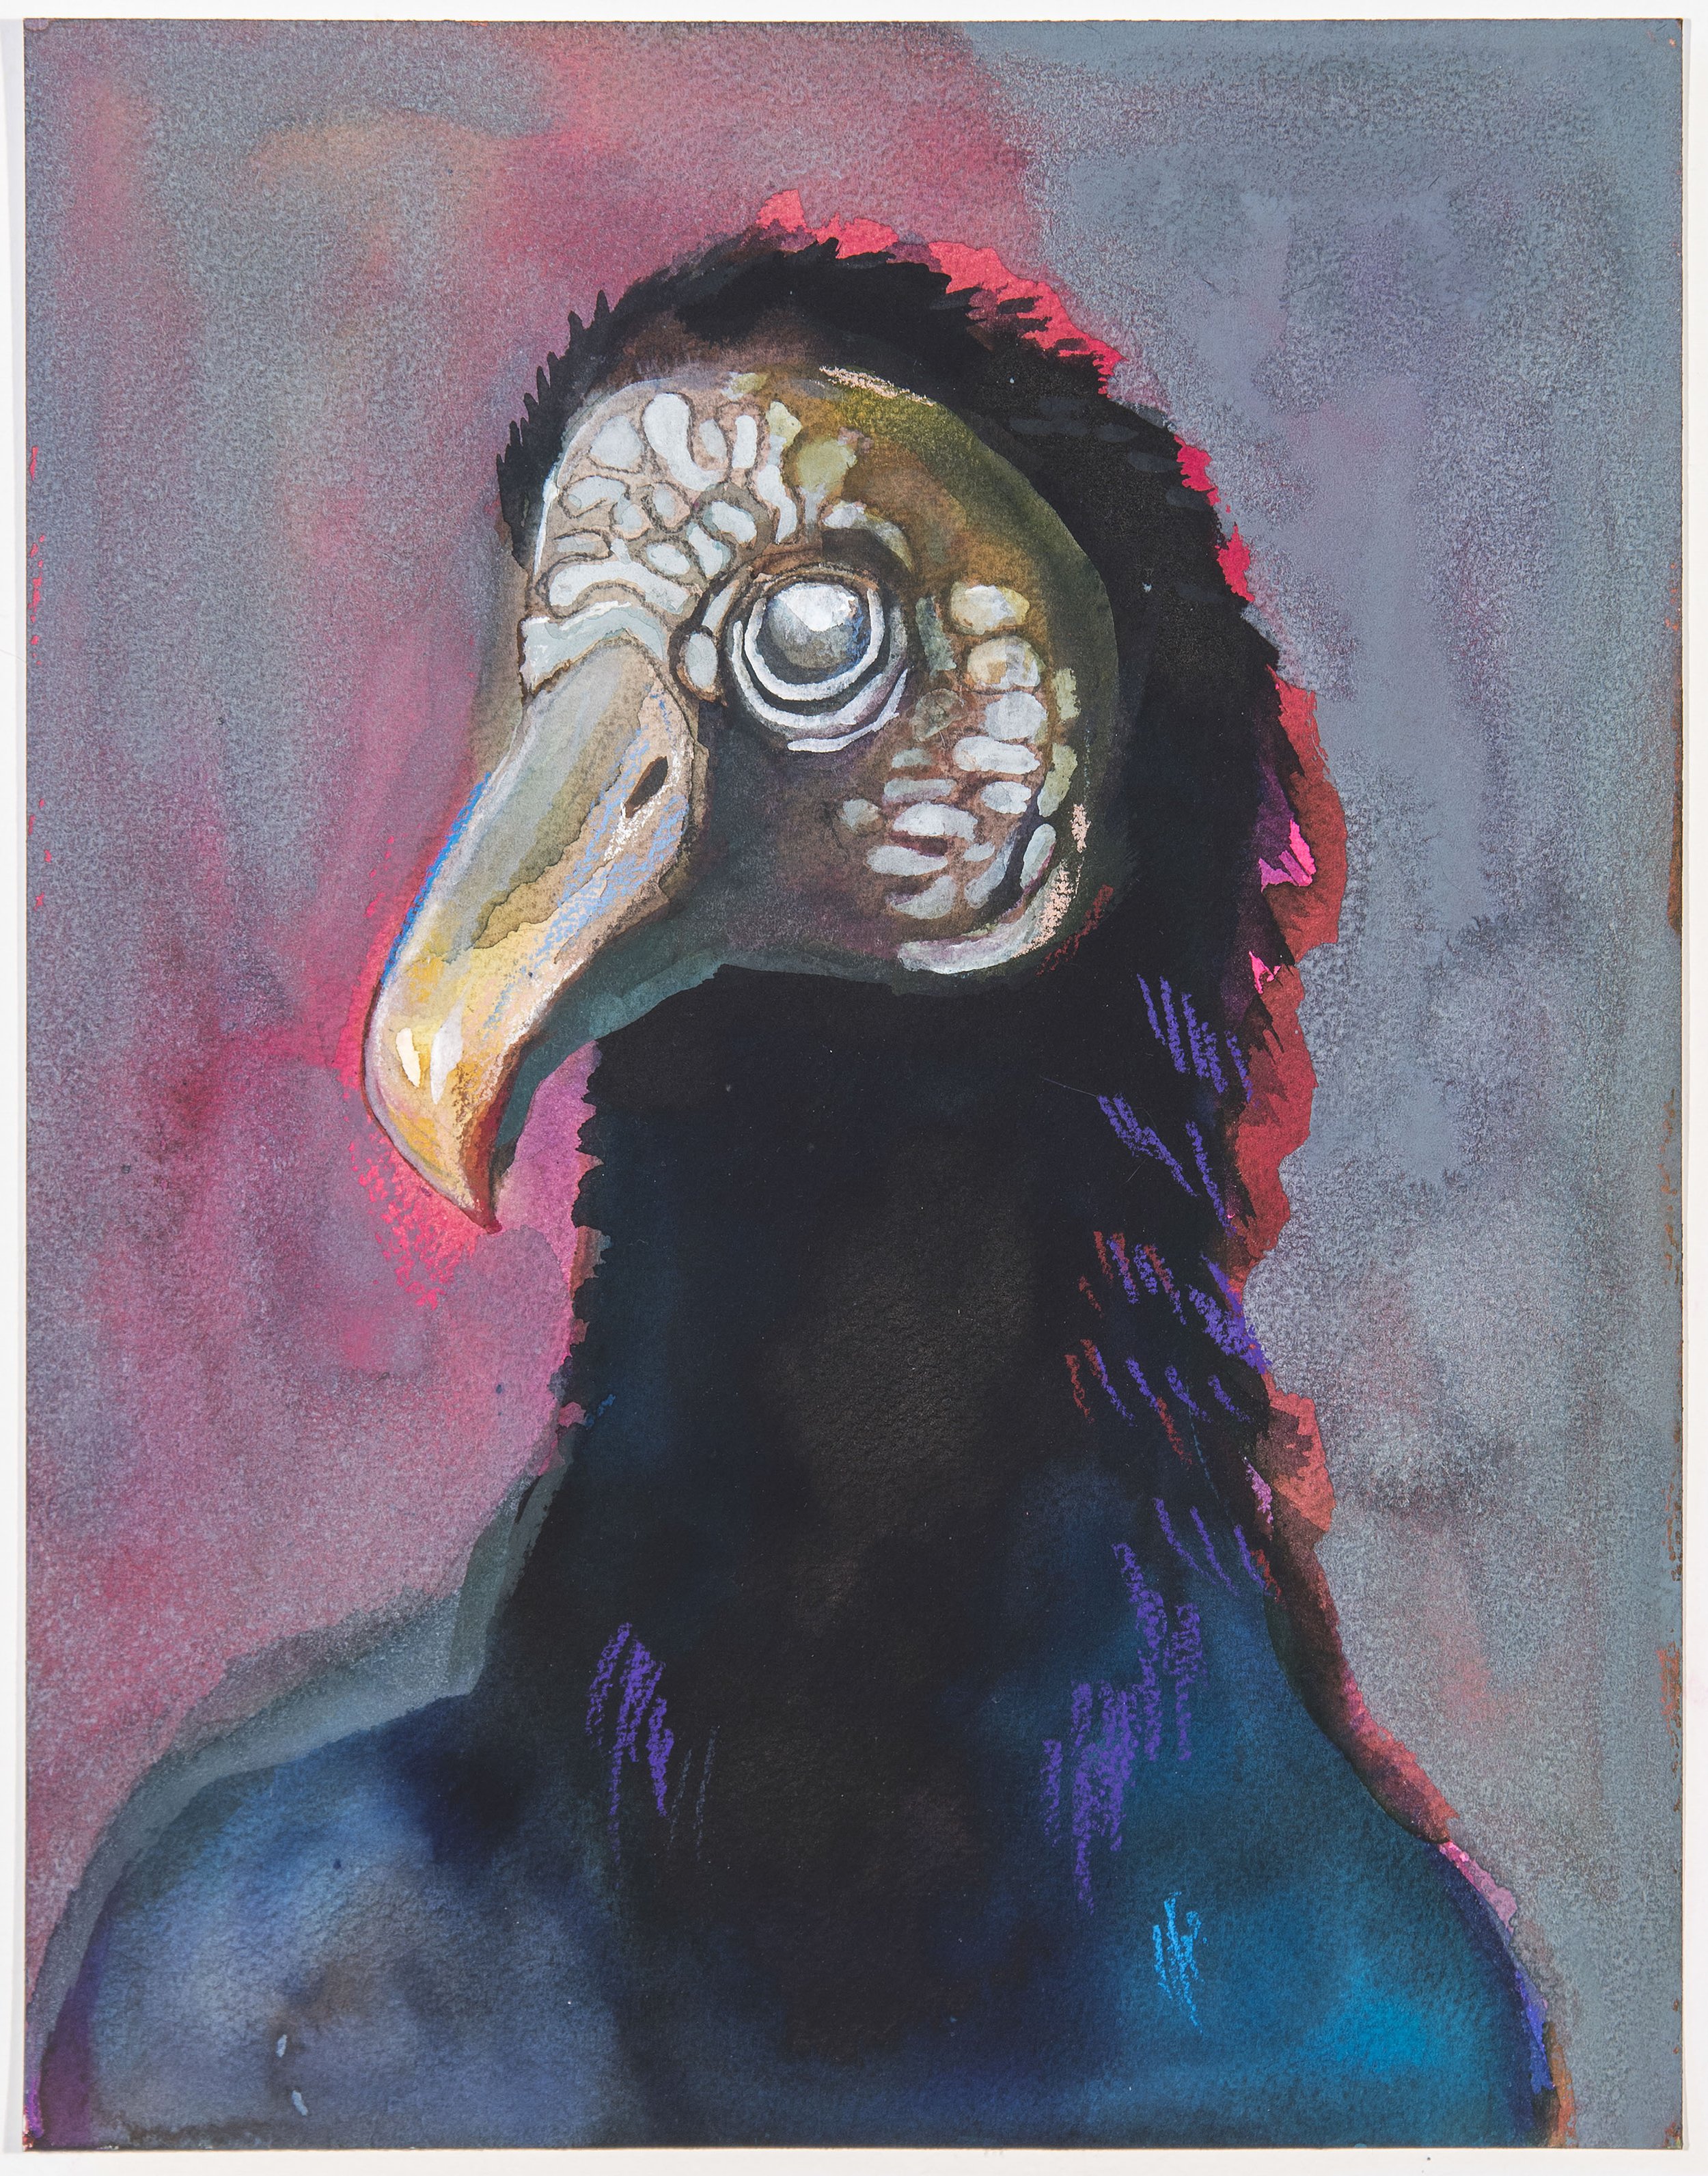   Karsen Heagle ,  Untitled Vulture (black/rose) , 2021, watercolor, colored pencil, acrylic on paper, 14 x 11" 